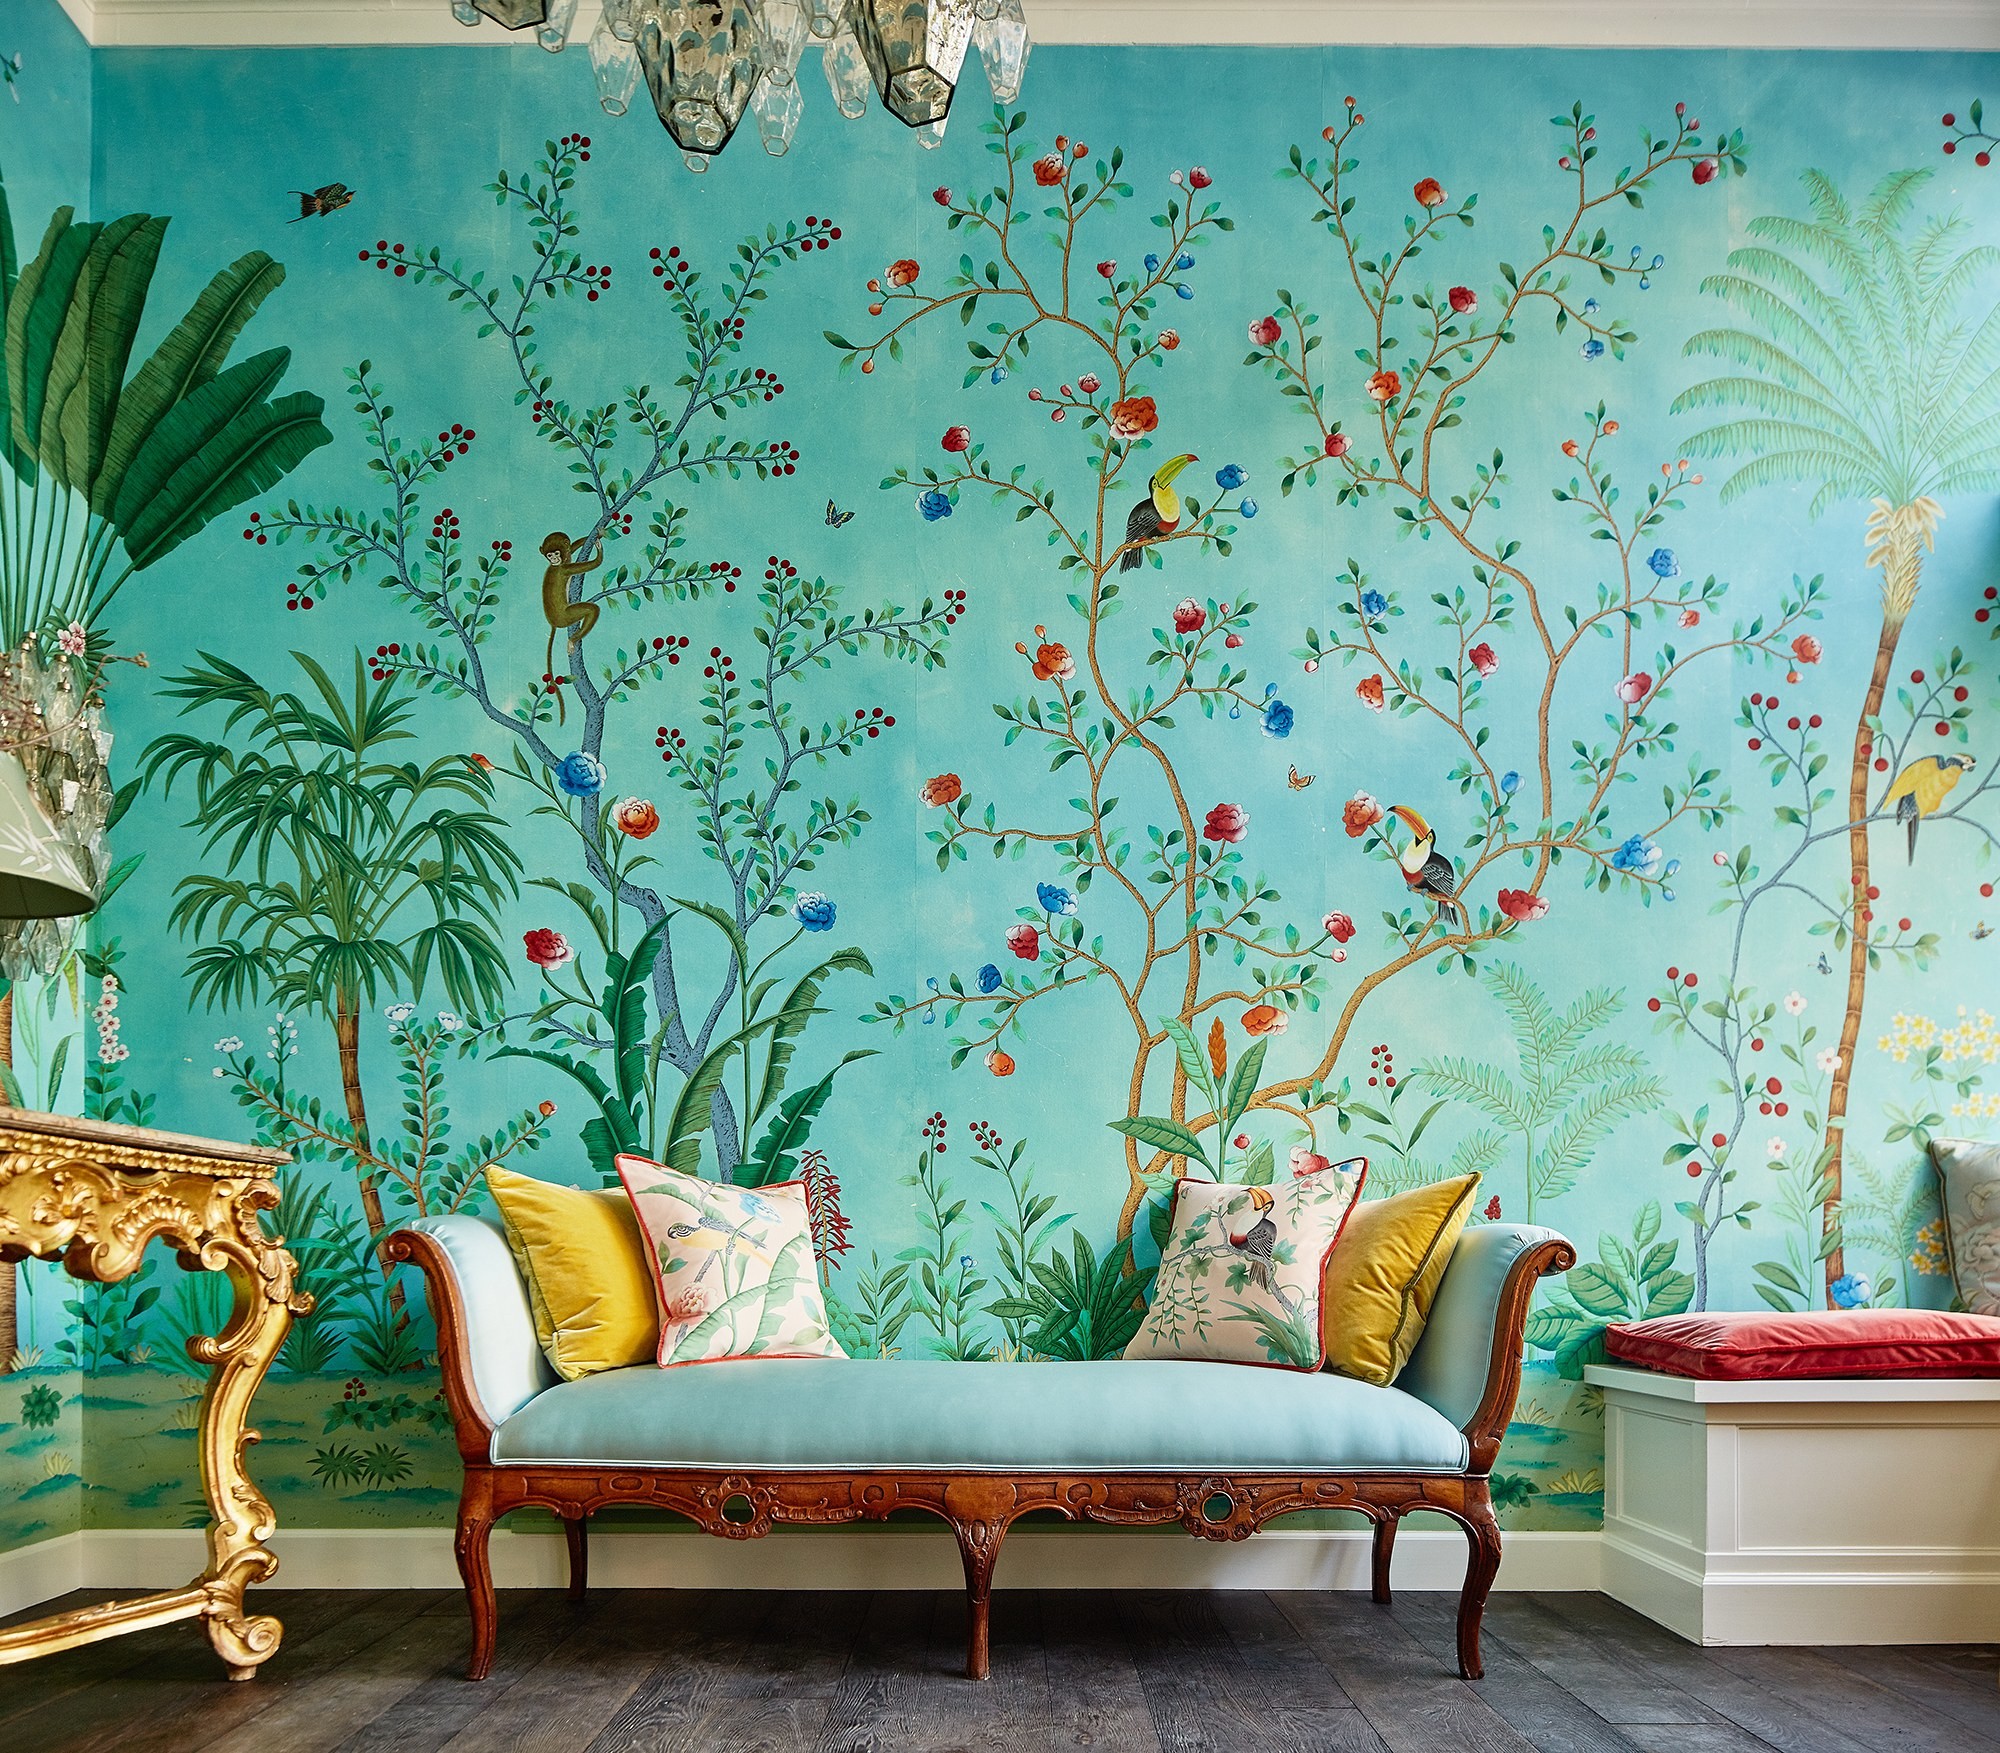 2000x1753 Fashion and Wallpaper Are Recommitting to Each Other in a Major Way - Vogue